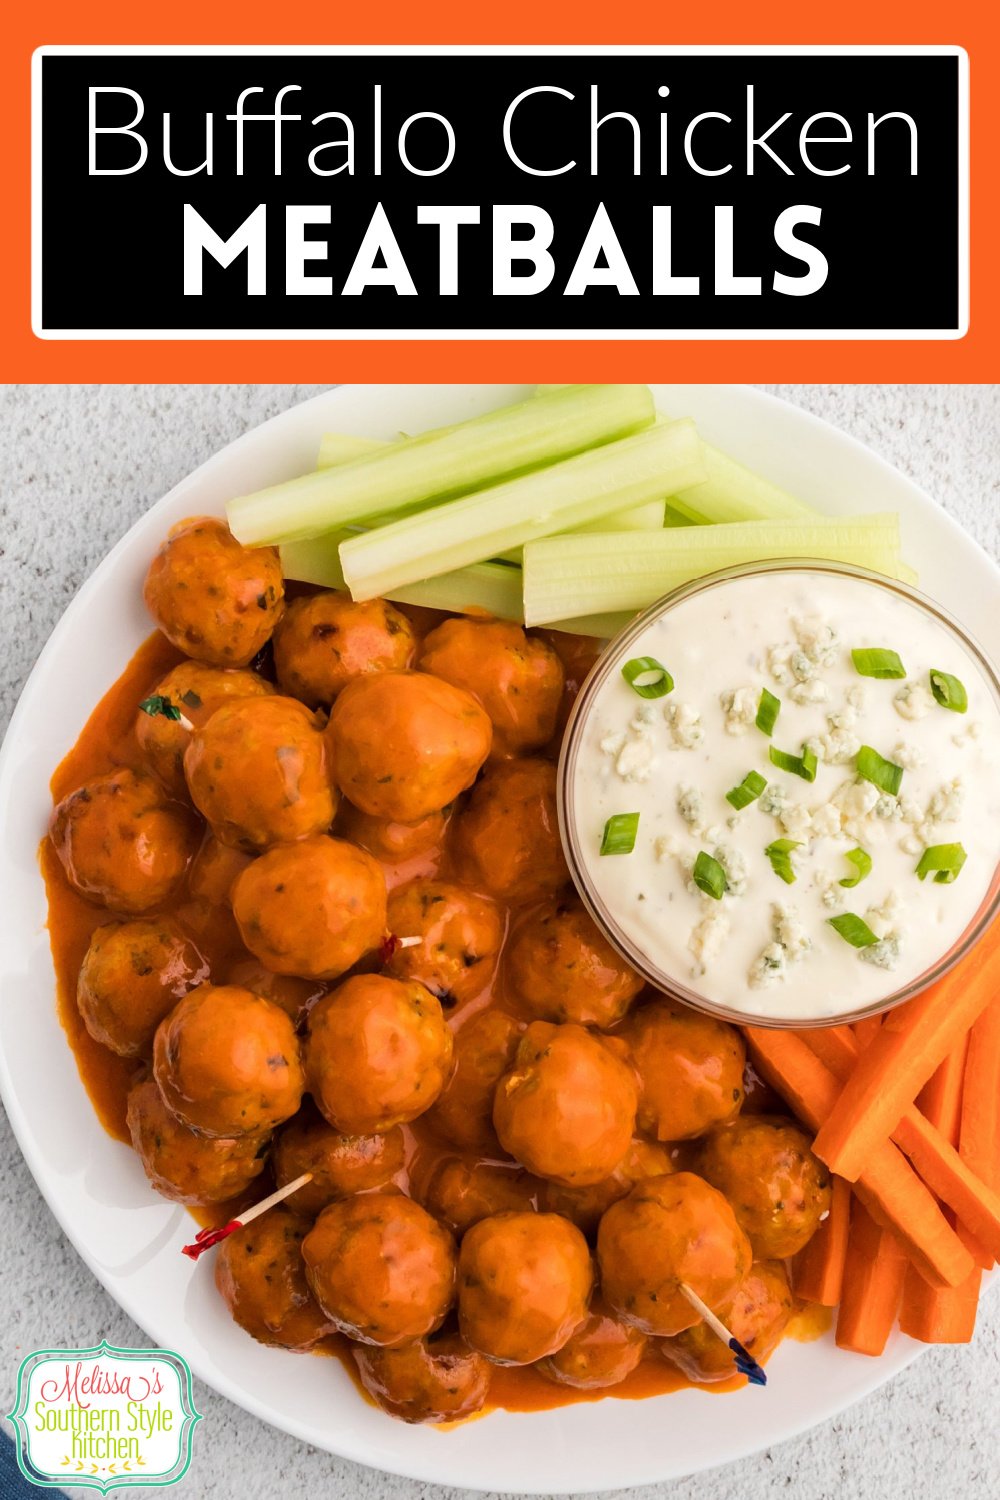 These Buffalo Chicken Meatballs are the ultimate fusion meatball for any occasion when you're serving casual finger foods #chickenrecipes #meatballs #buffalochicken #buffalochickenmeatballs #buffalowings #appetizers #meatballrecipes #easychickenrecipes #footballrecipes via @melissasssk